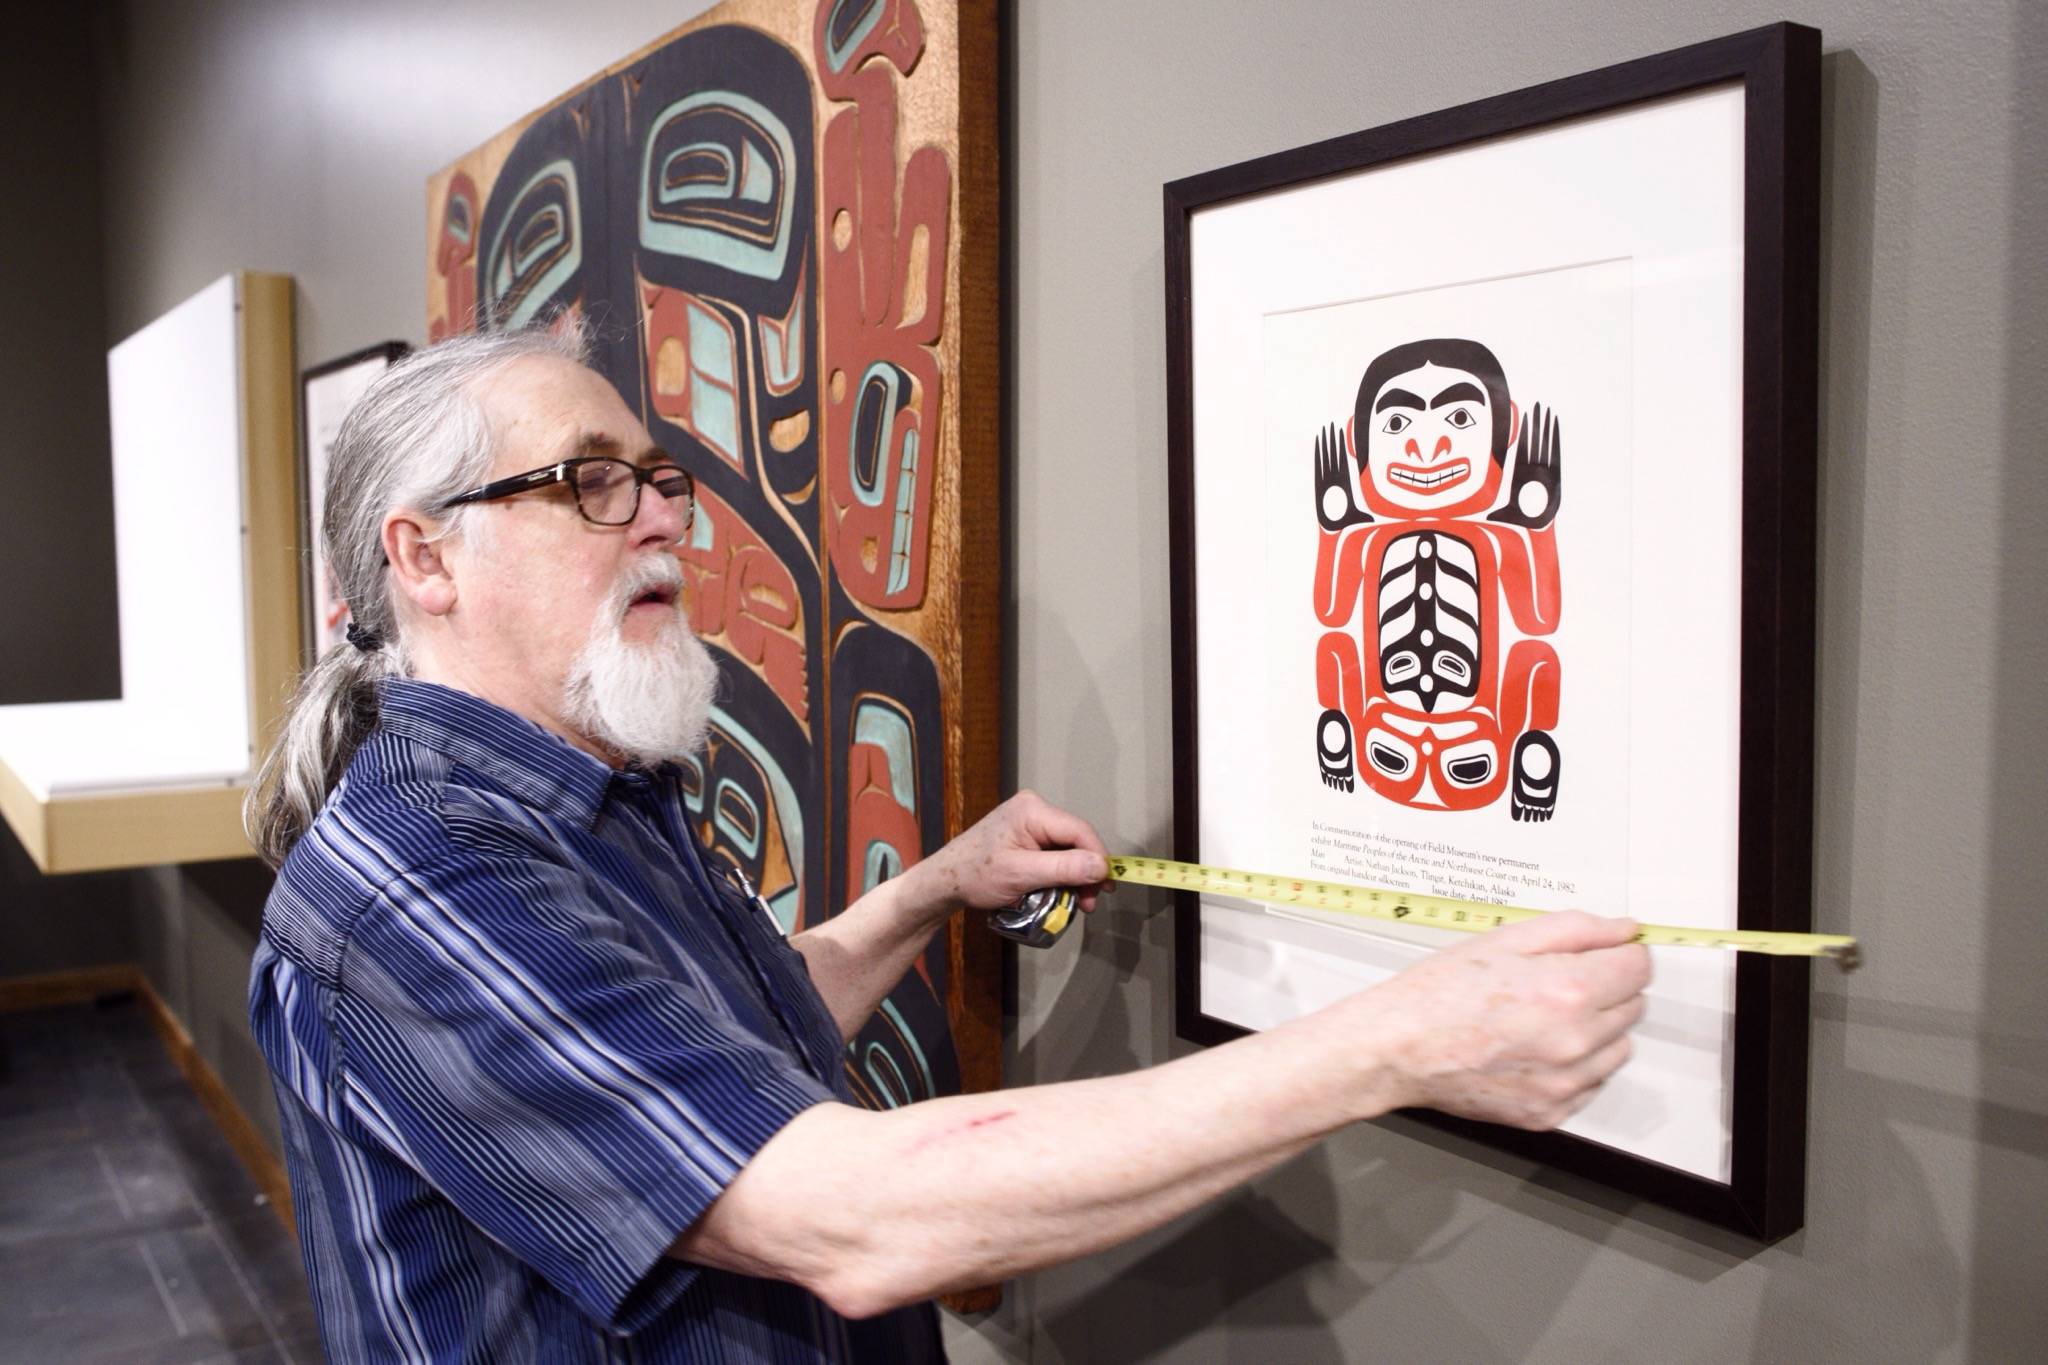 Paul Gardinier, an exhibit specialist, works to install a Nathan Jackson retrospective in the gallery at the Walter Soboleff Center on Monday, March 25, 2019. (Michael Penn | Juneau Empire)